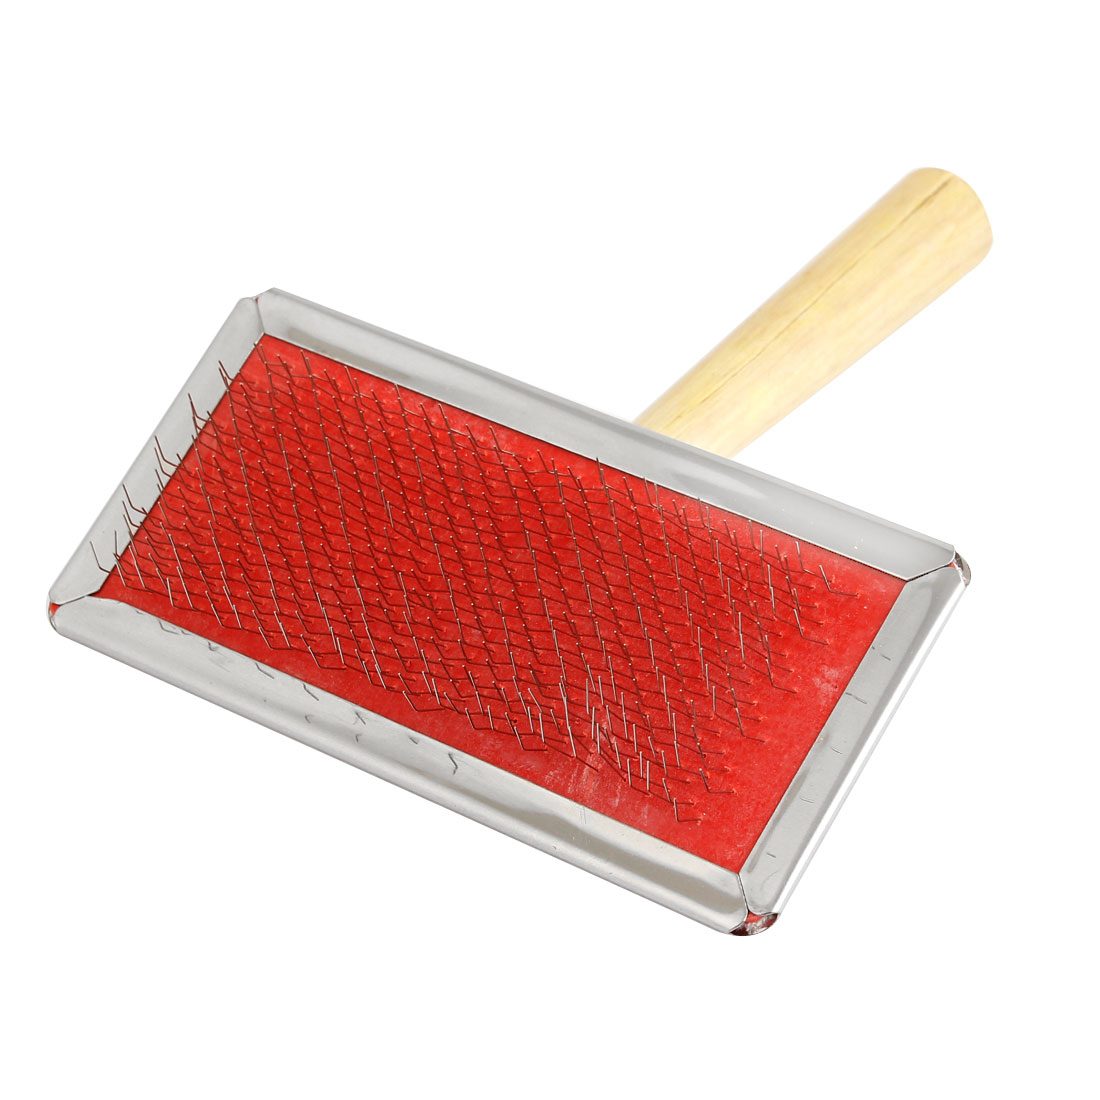 Unique Bargains Wooden Grip Dog Cat Pet Fur Grooming Comb Brush Shedding Tool Red Silver Tone